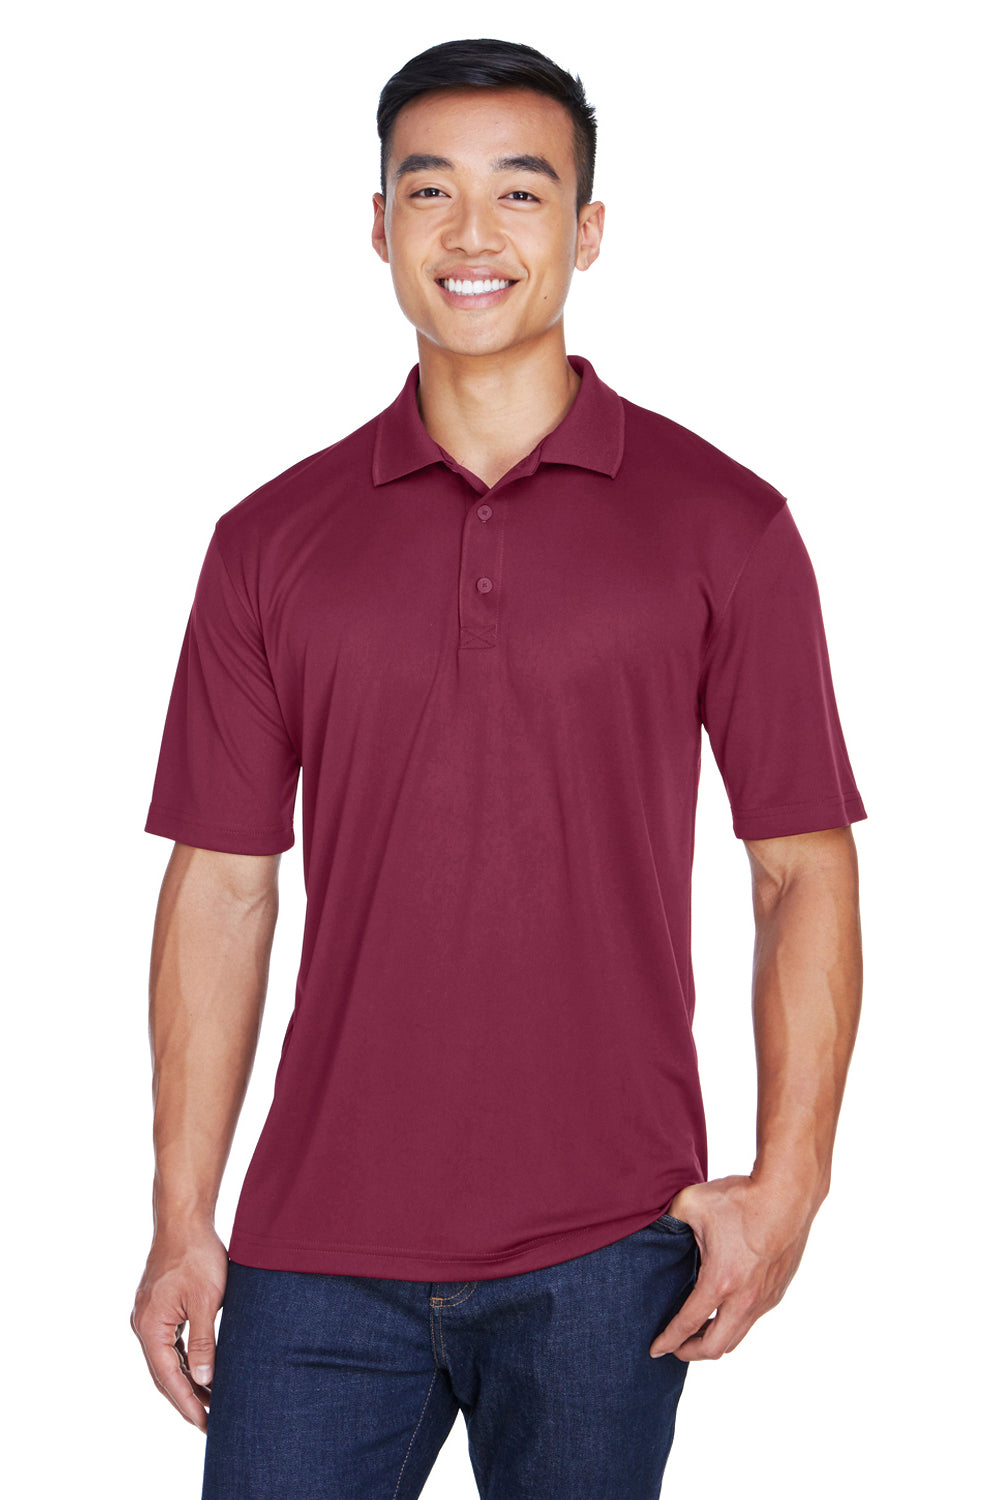 UltraClub 8405 Mens Cool & Dry Moisture Wicking Short Sleeve Polo Shirt Maroon Front